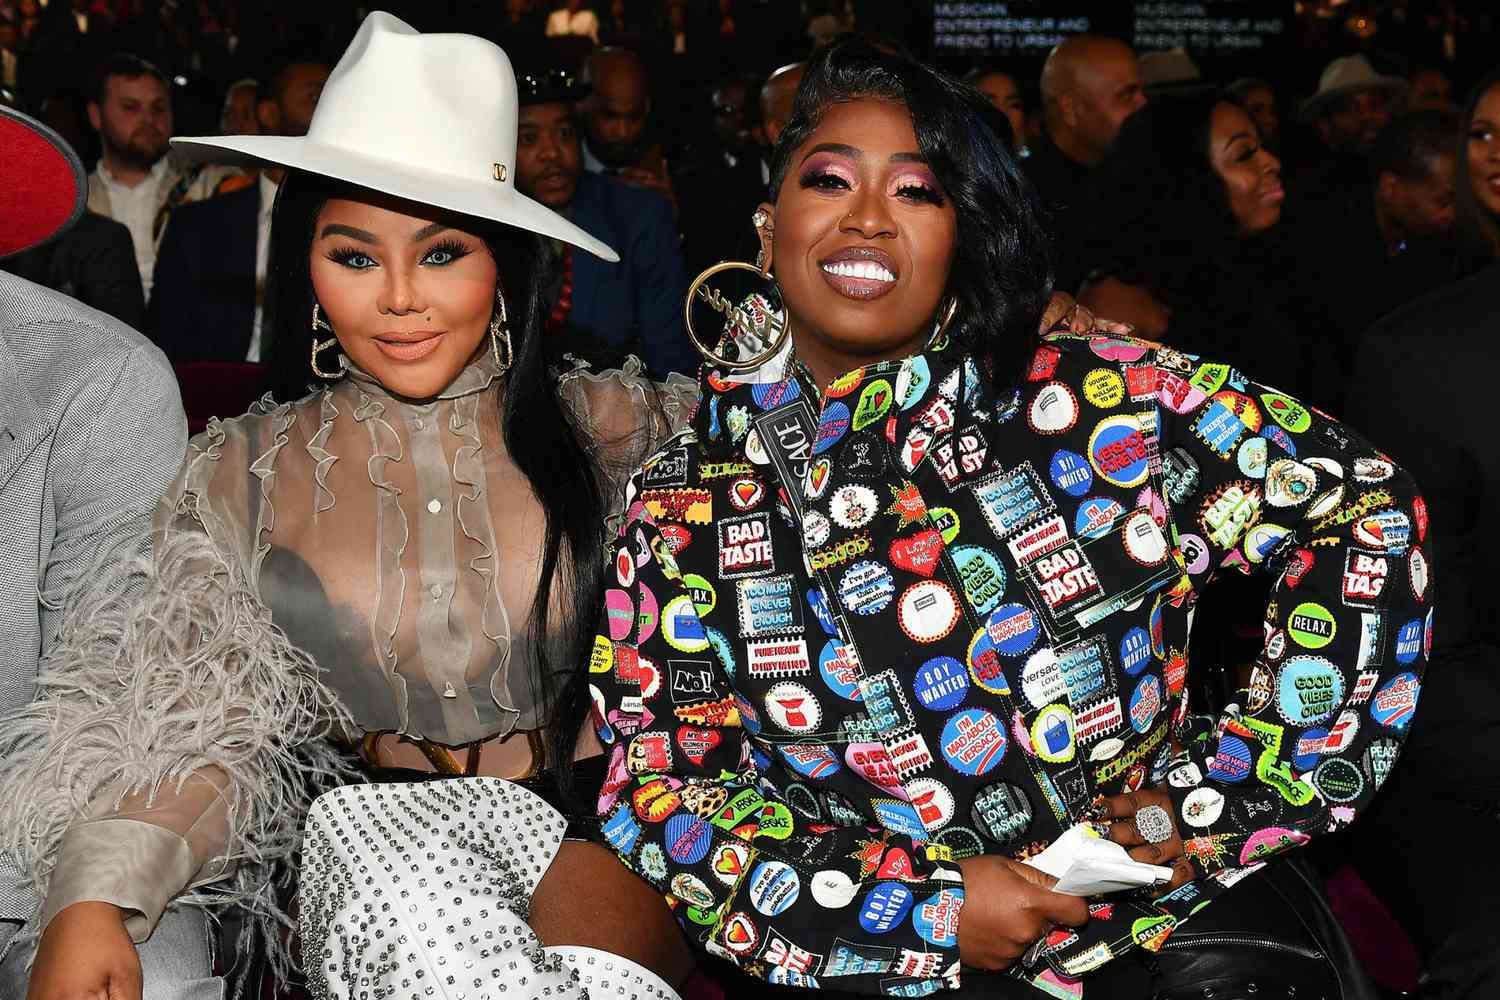 Lil' Kim and Missy Elliott attends 2019 Urban One Honors at MGM National Harbor on December 05, 2019 in Oxon Hill, Maryland